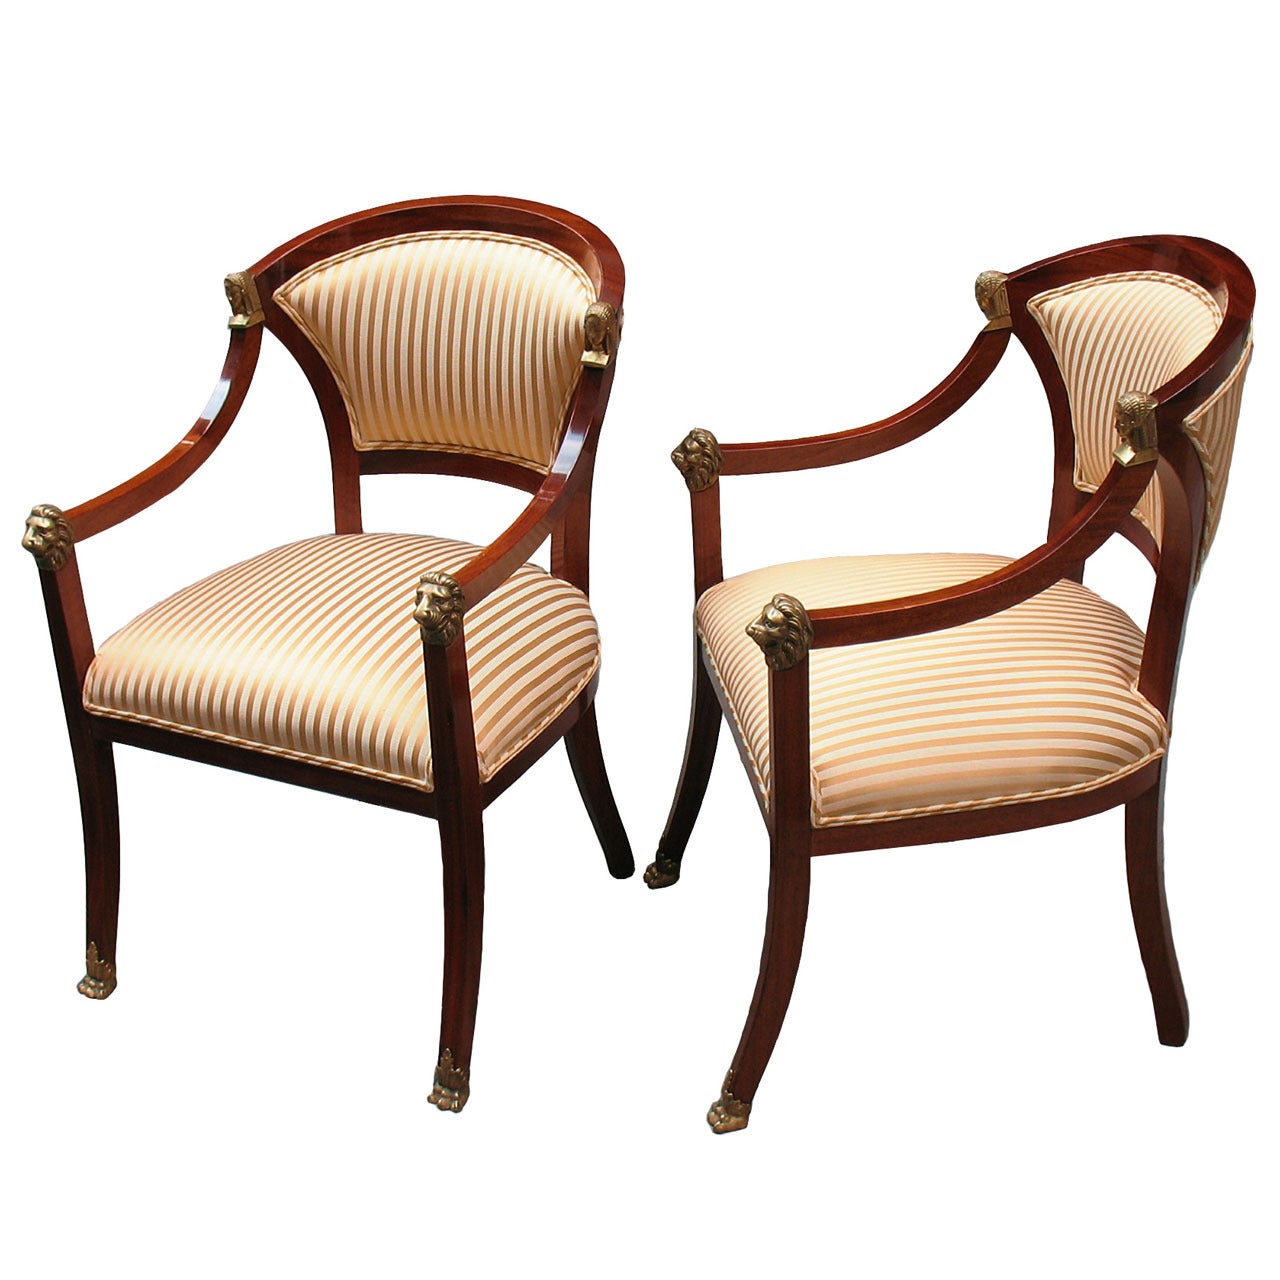 Pair of Remarkable French Empire First Revival Chairs